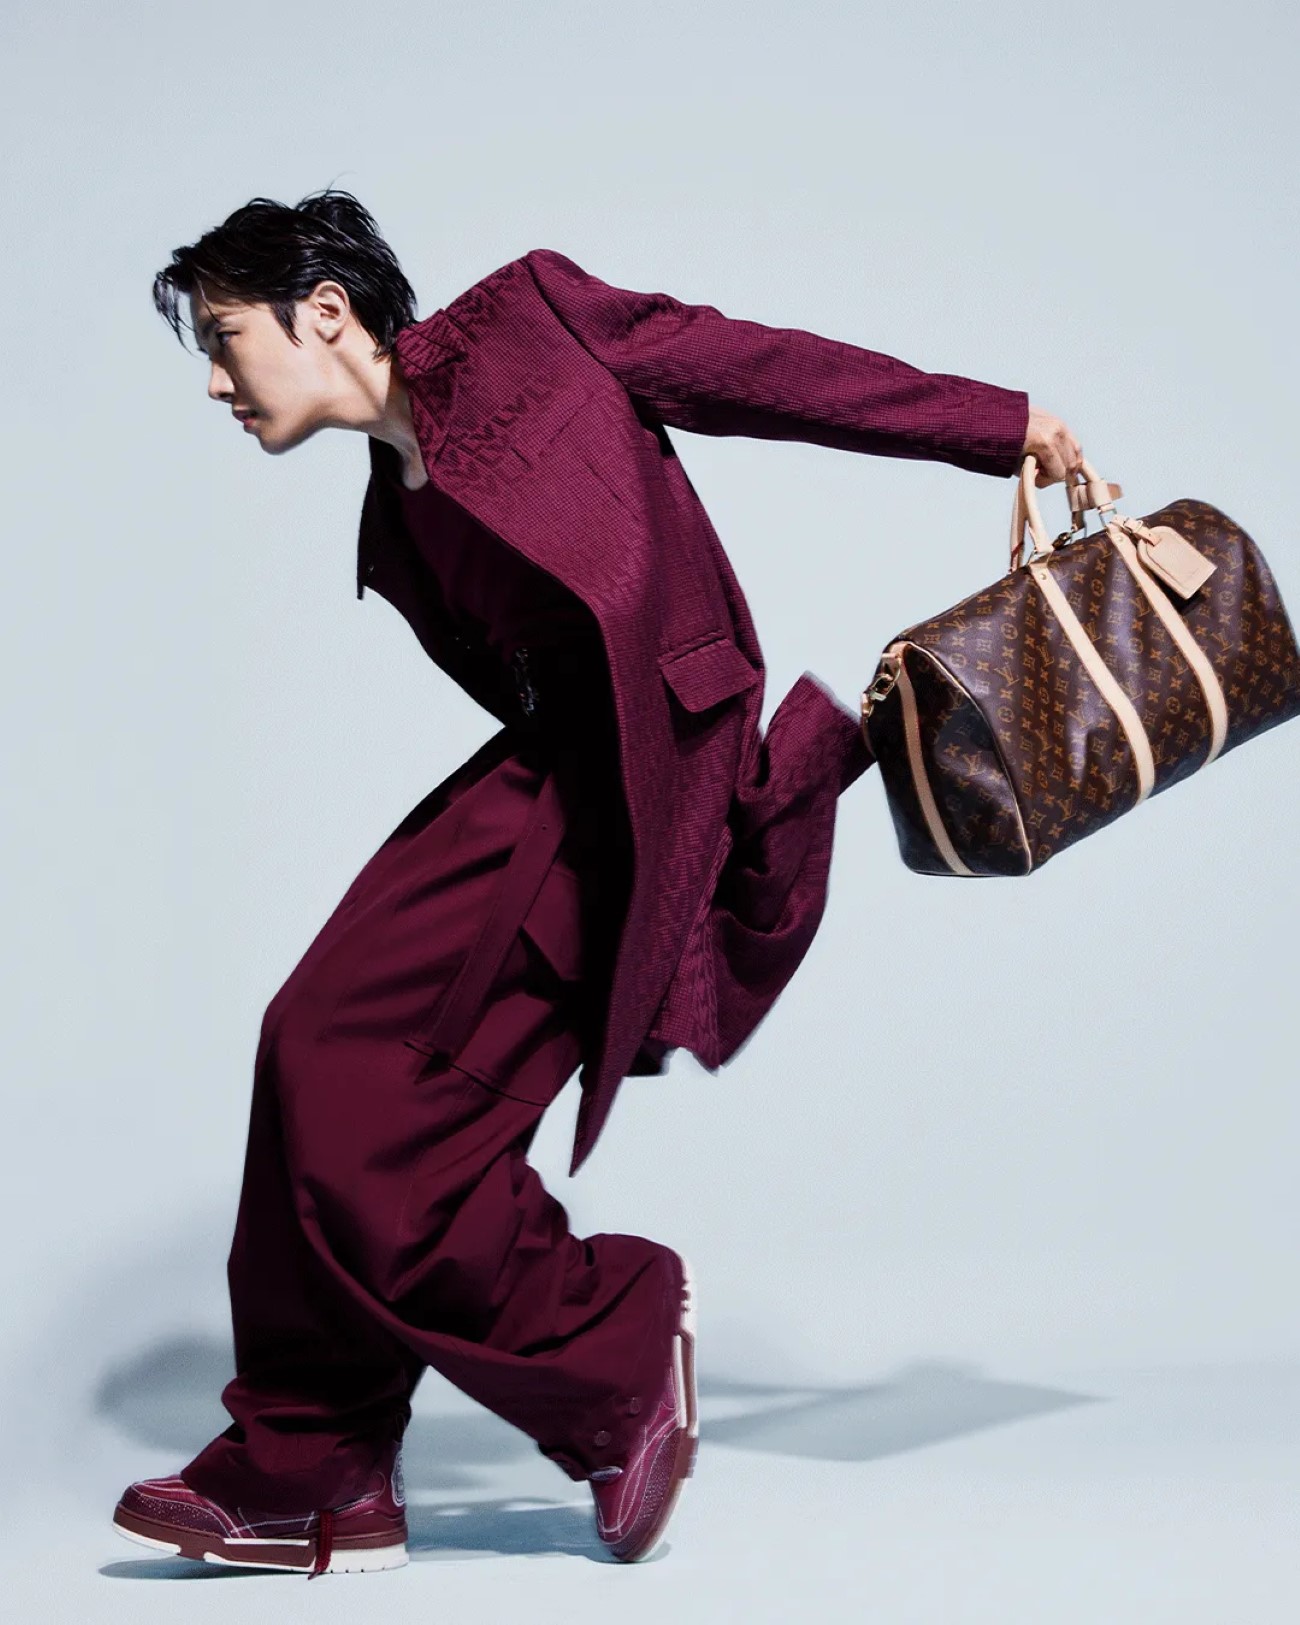 BTS' J-Hope shines bright in Louis Vuitton's Keepall campaign